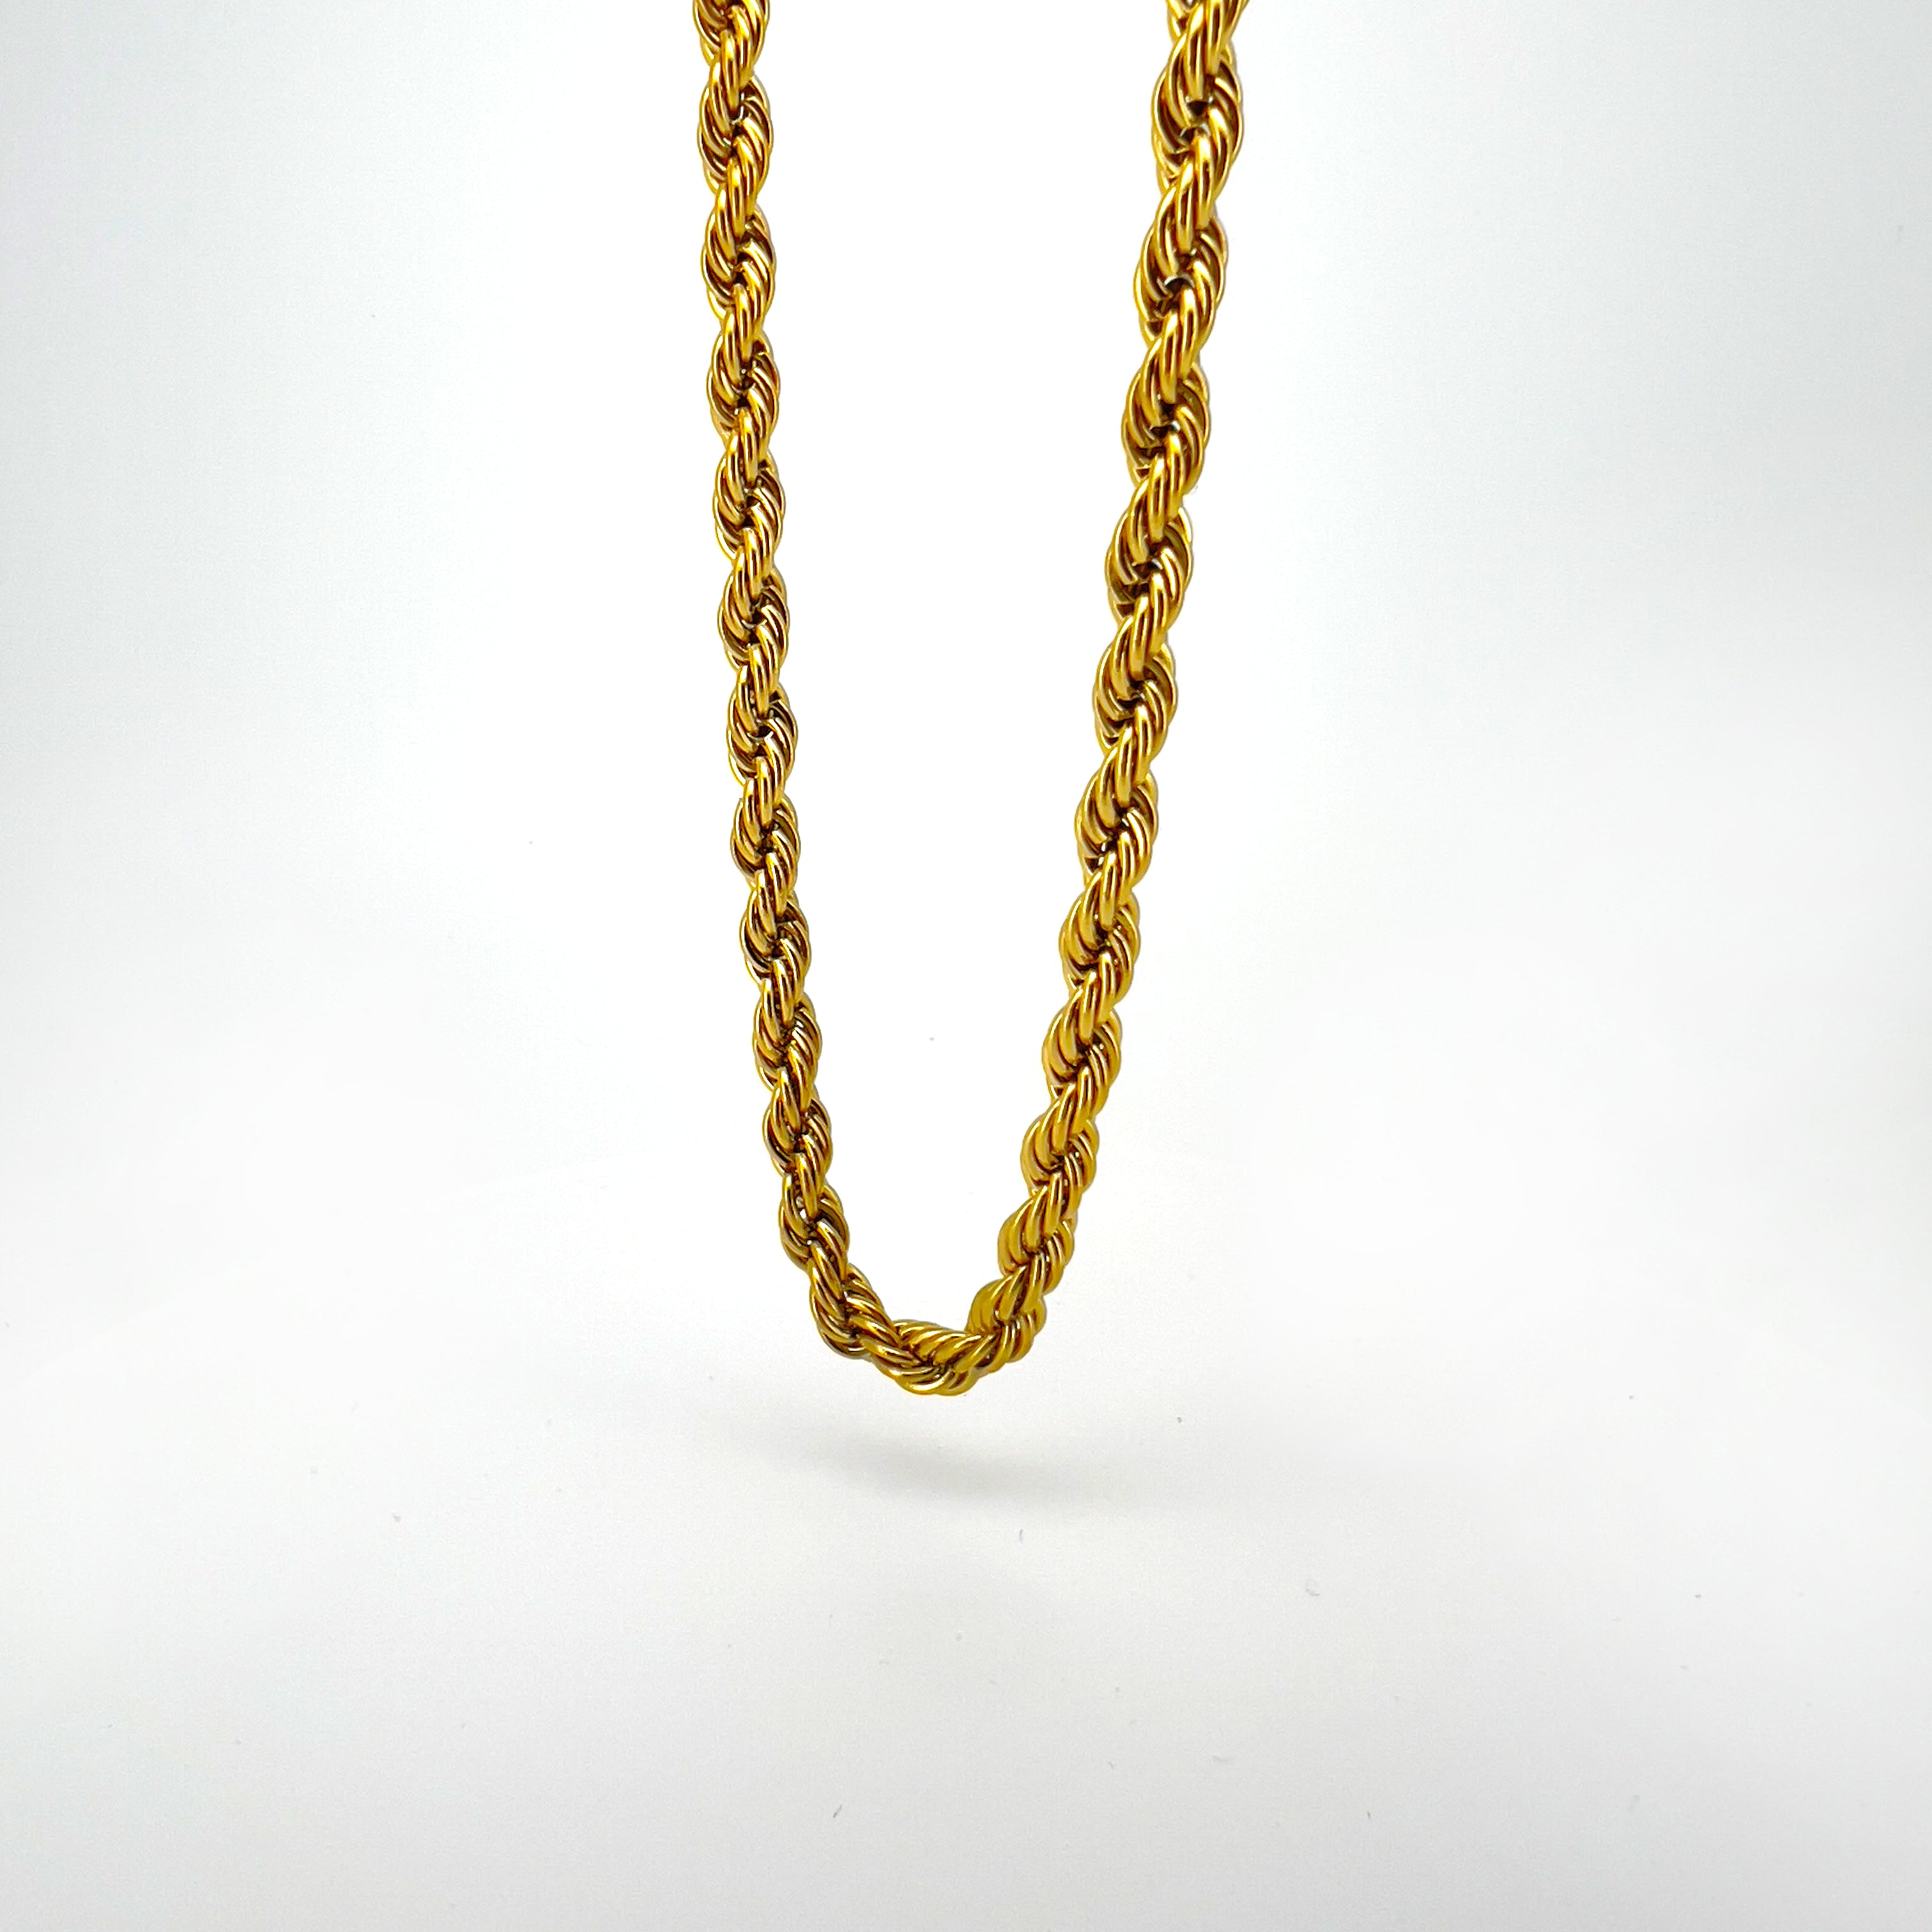 Graham Stainless Steel Rope Chain Necklace